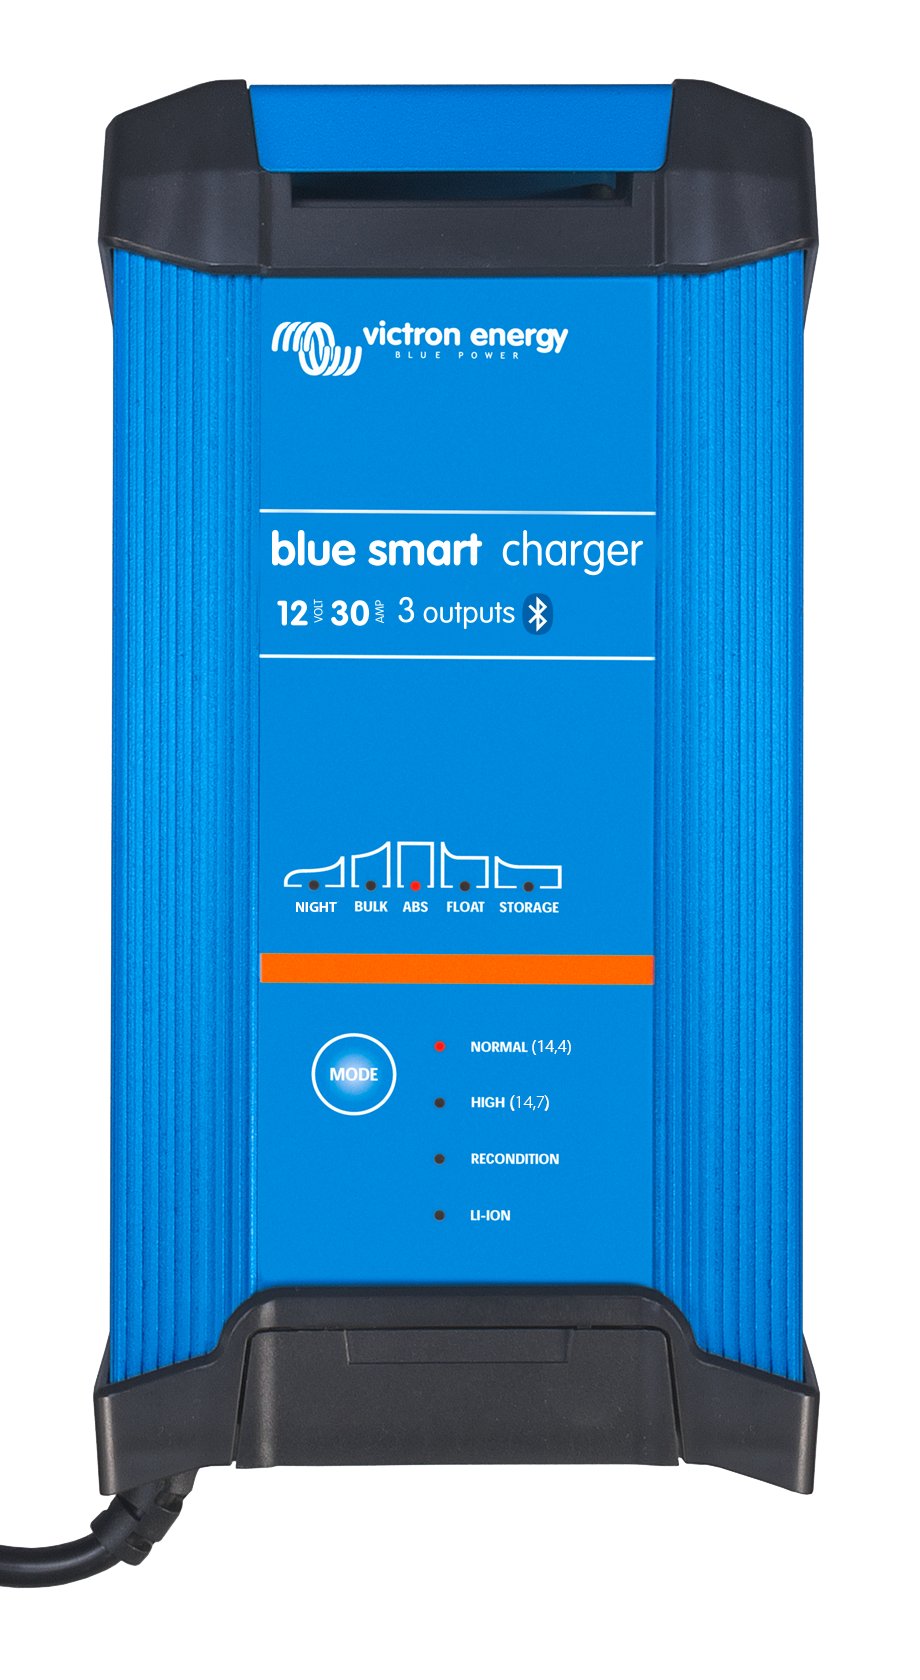 How do I use my Victron blue smart charger as a power supply?